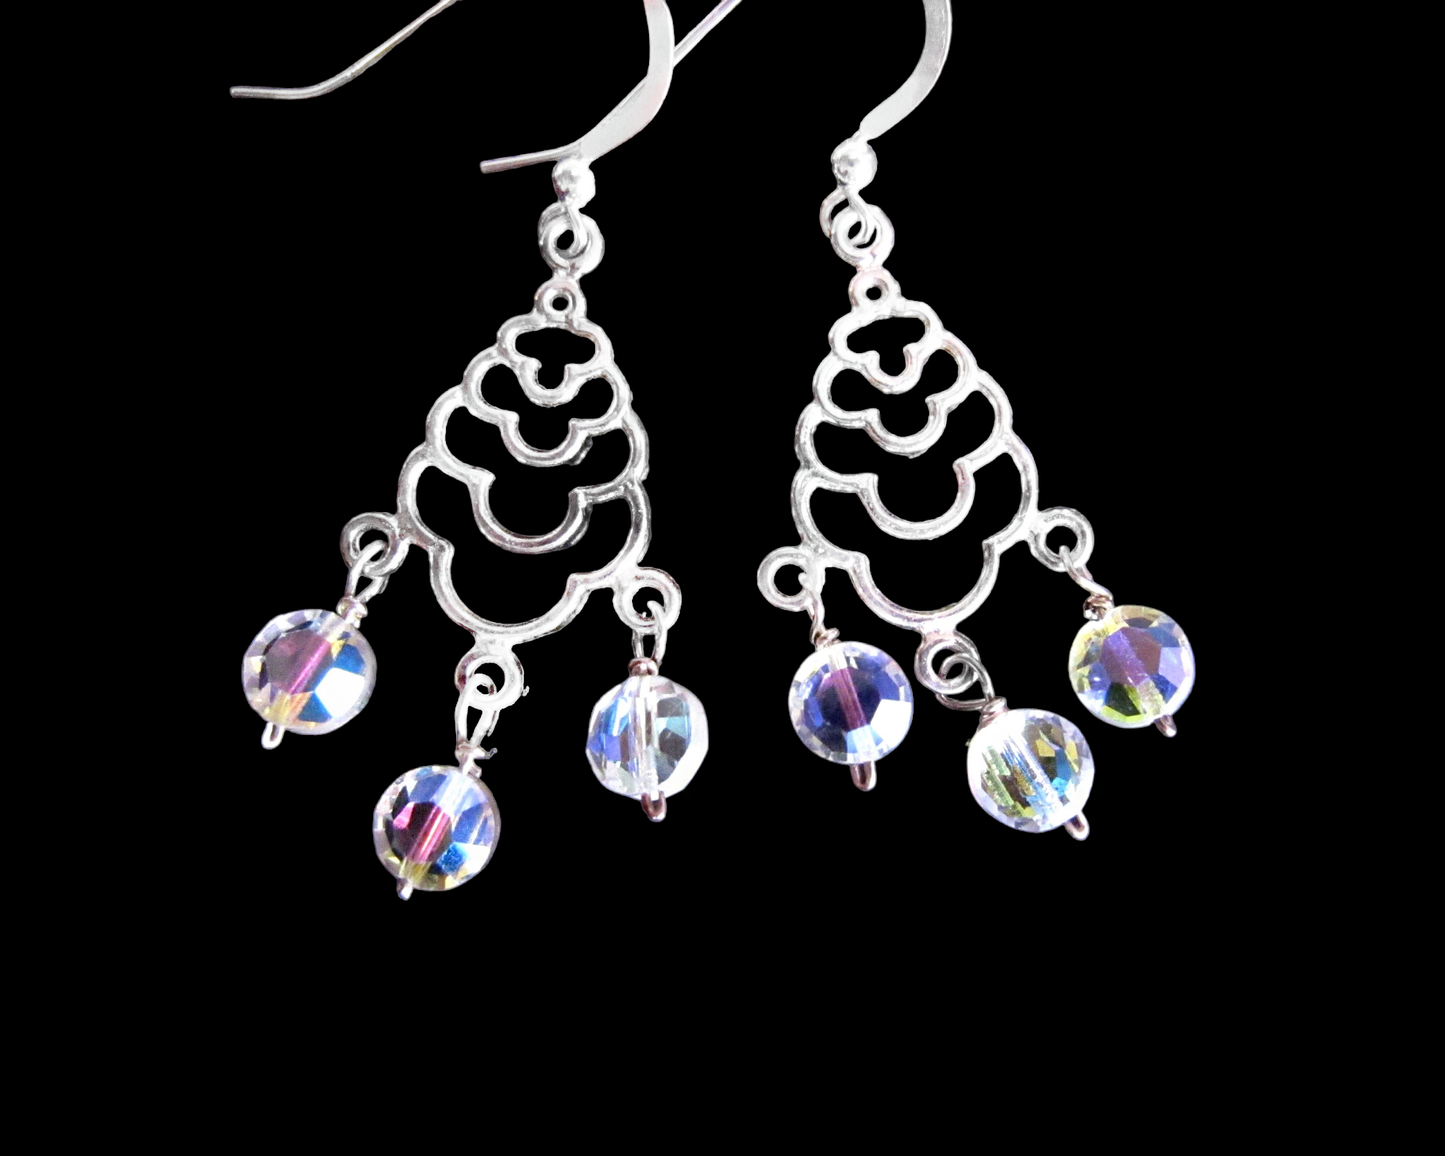 Art Deco Style Long Sterling Silver Chandelier Earrings with three dangly faceted coin shaped Clear AB crystals. The earing are dangling on French earring wires.